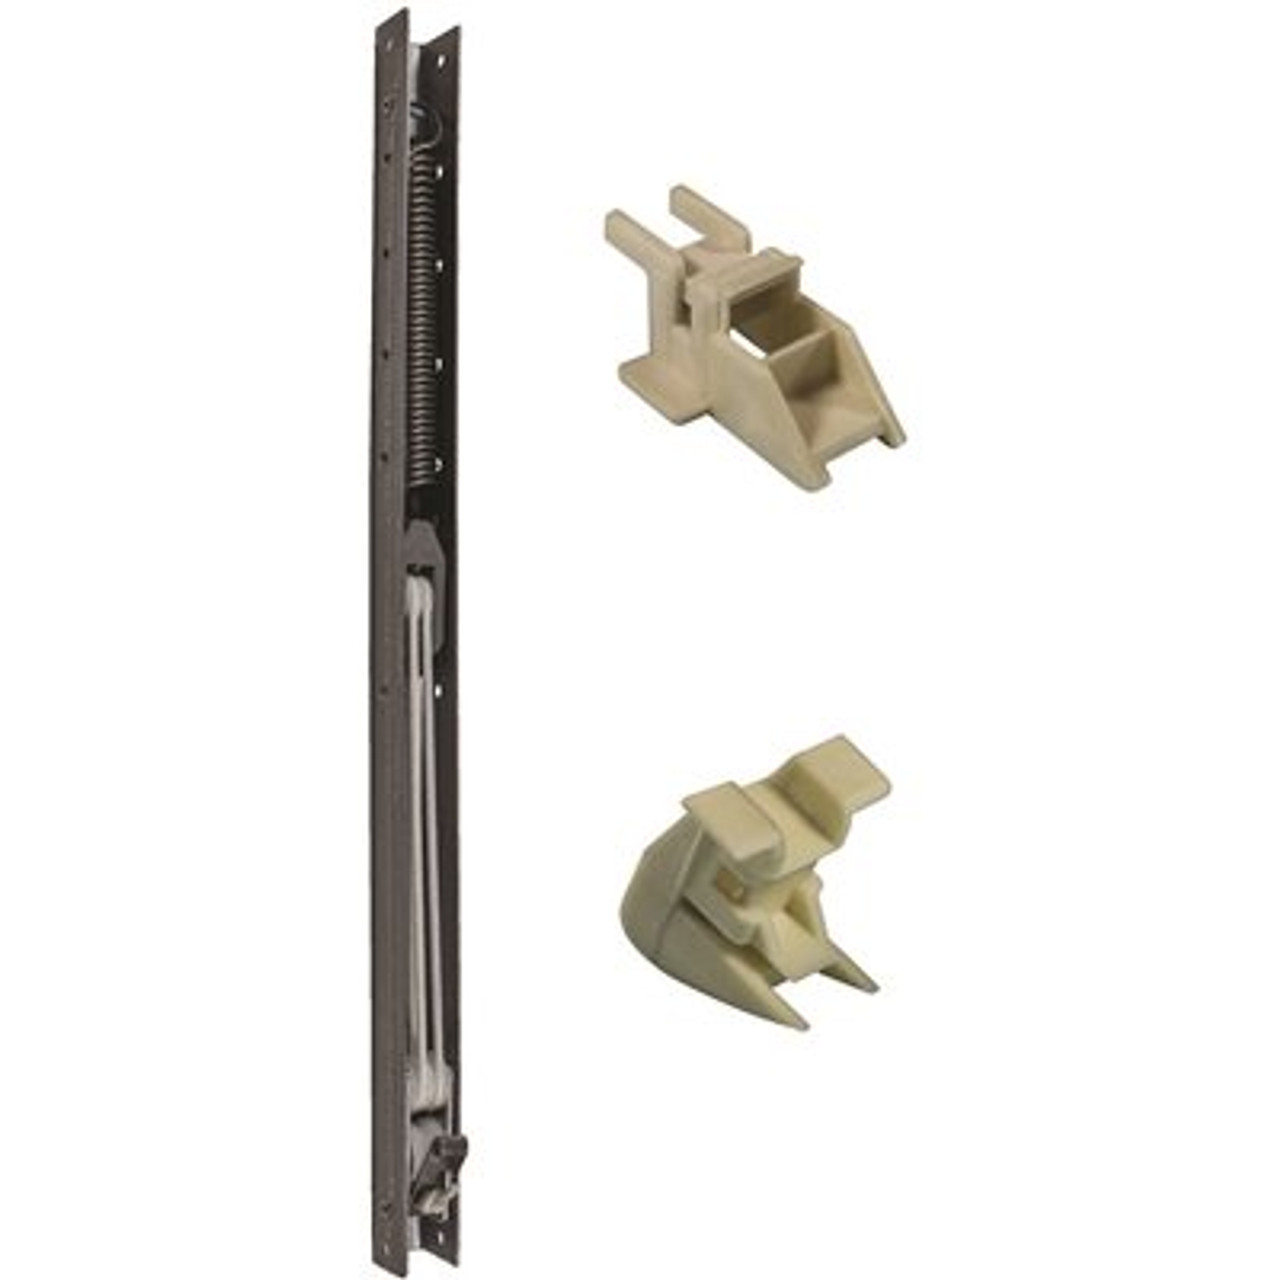 23 In. L Window Channel Balance 2210 With 9/16 In. W X 5/8 In. D Top And Bottom End Brackets Attached - 314413436